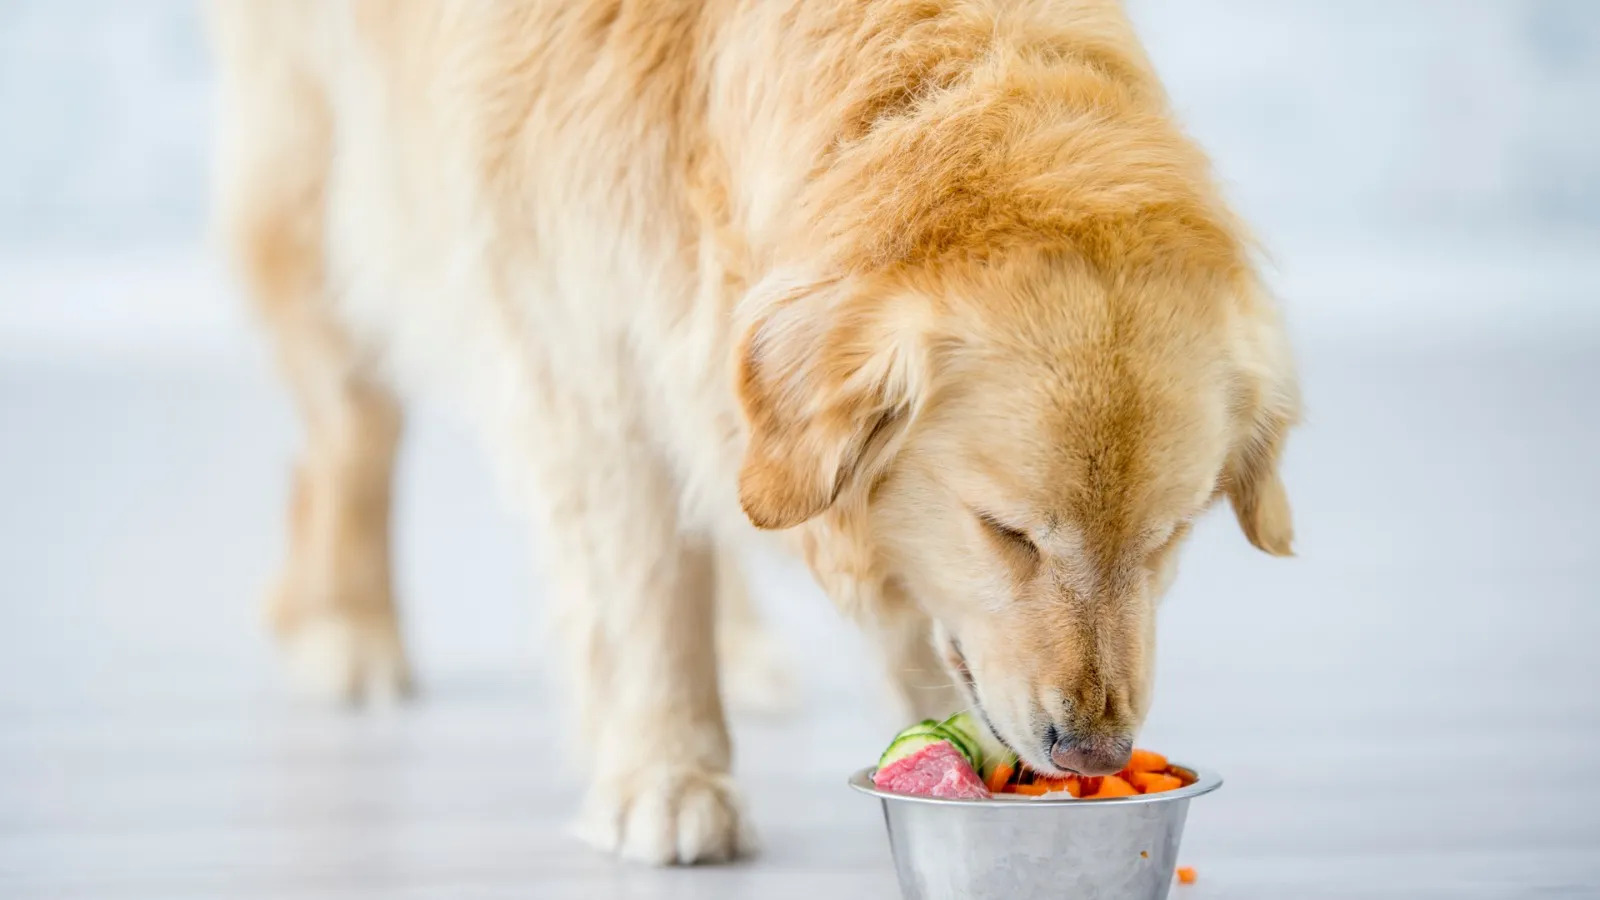 What To Feed Dogs With Cancer